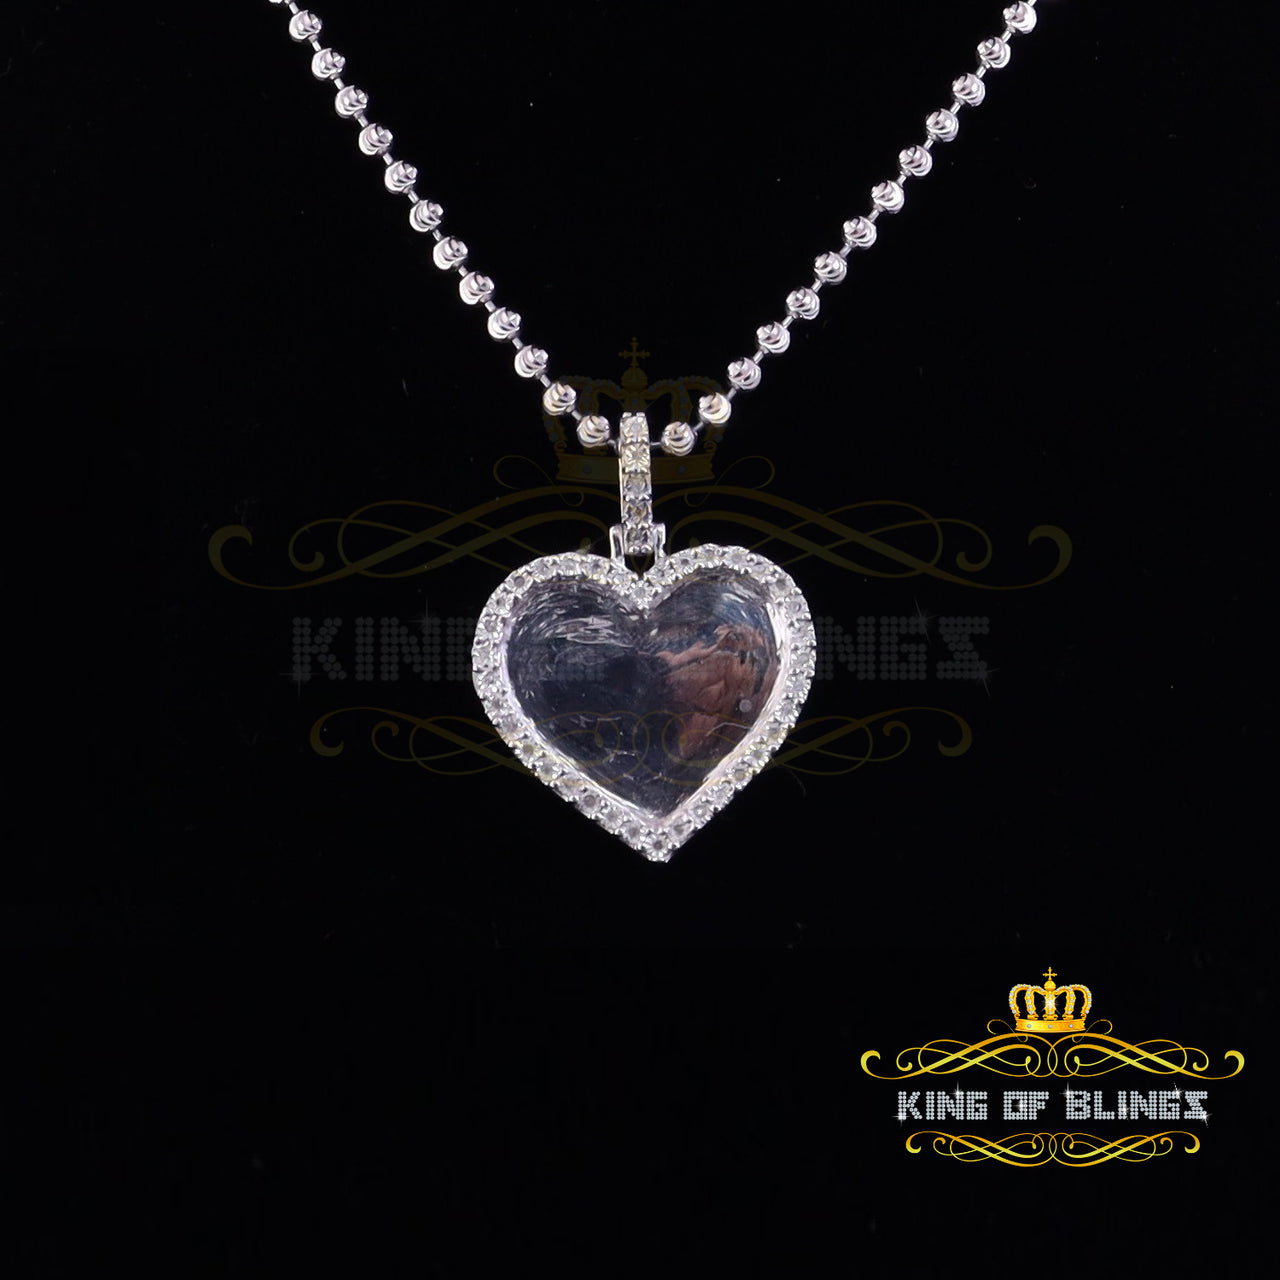 King Of Bling's KOB Real 0.10ct Diamond White 925 Sterling Silver 1" Heart PICTURE Charm Pendant